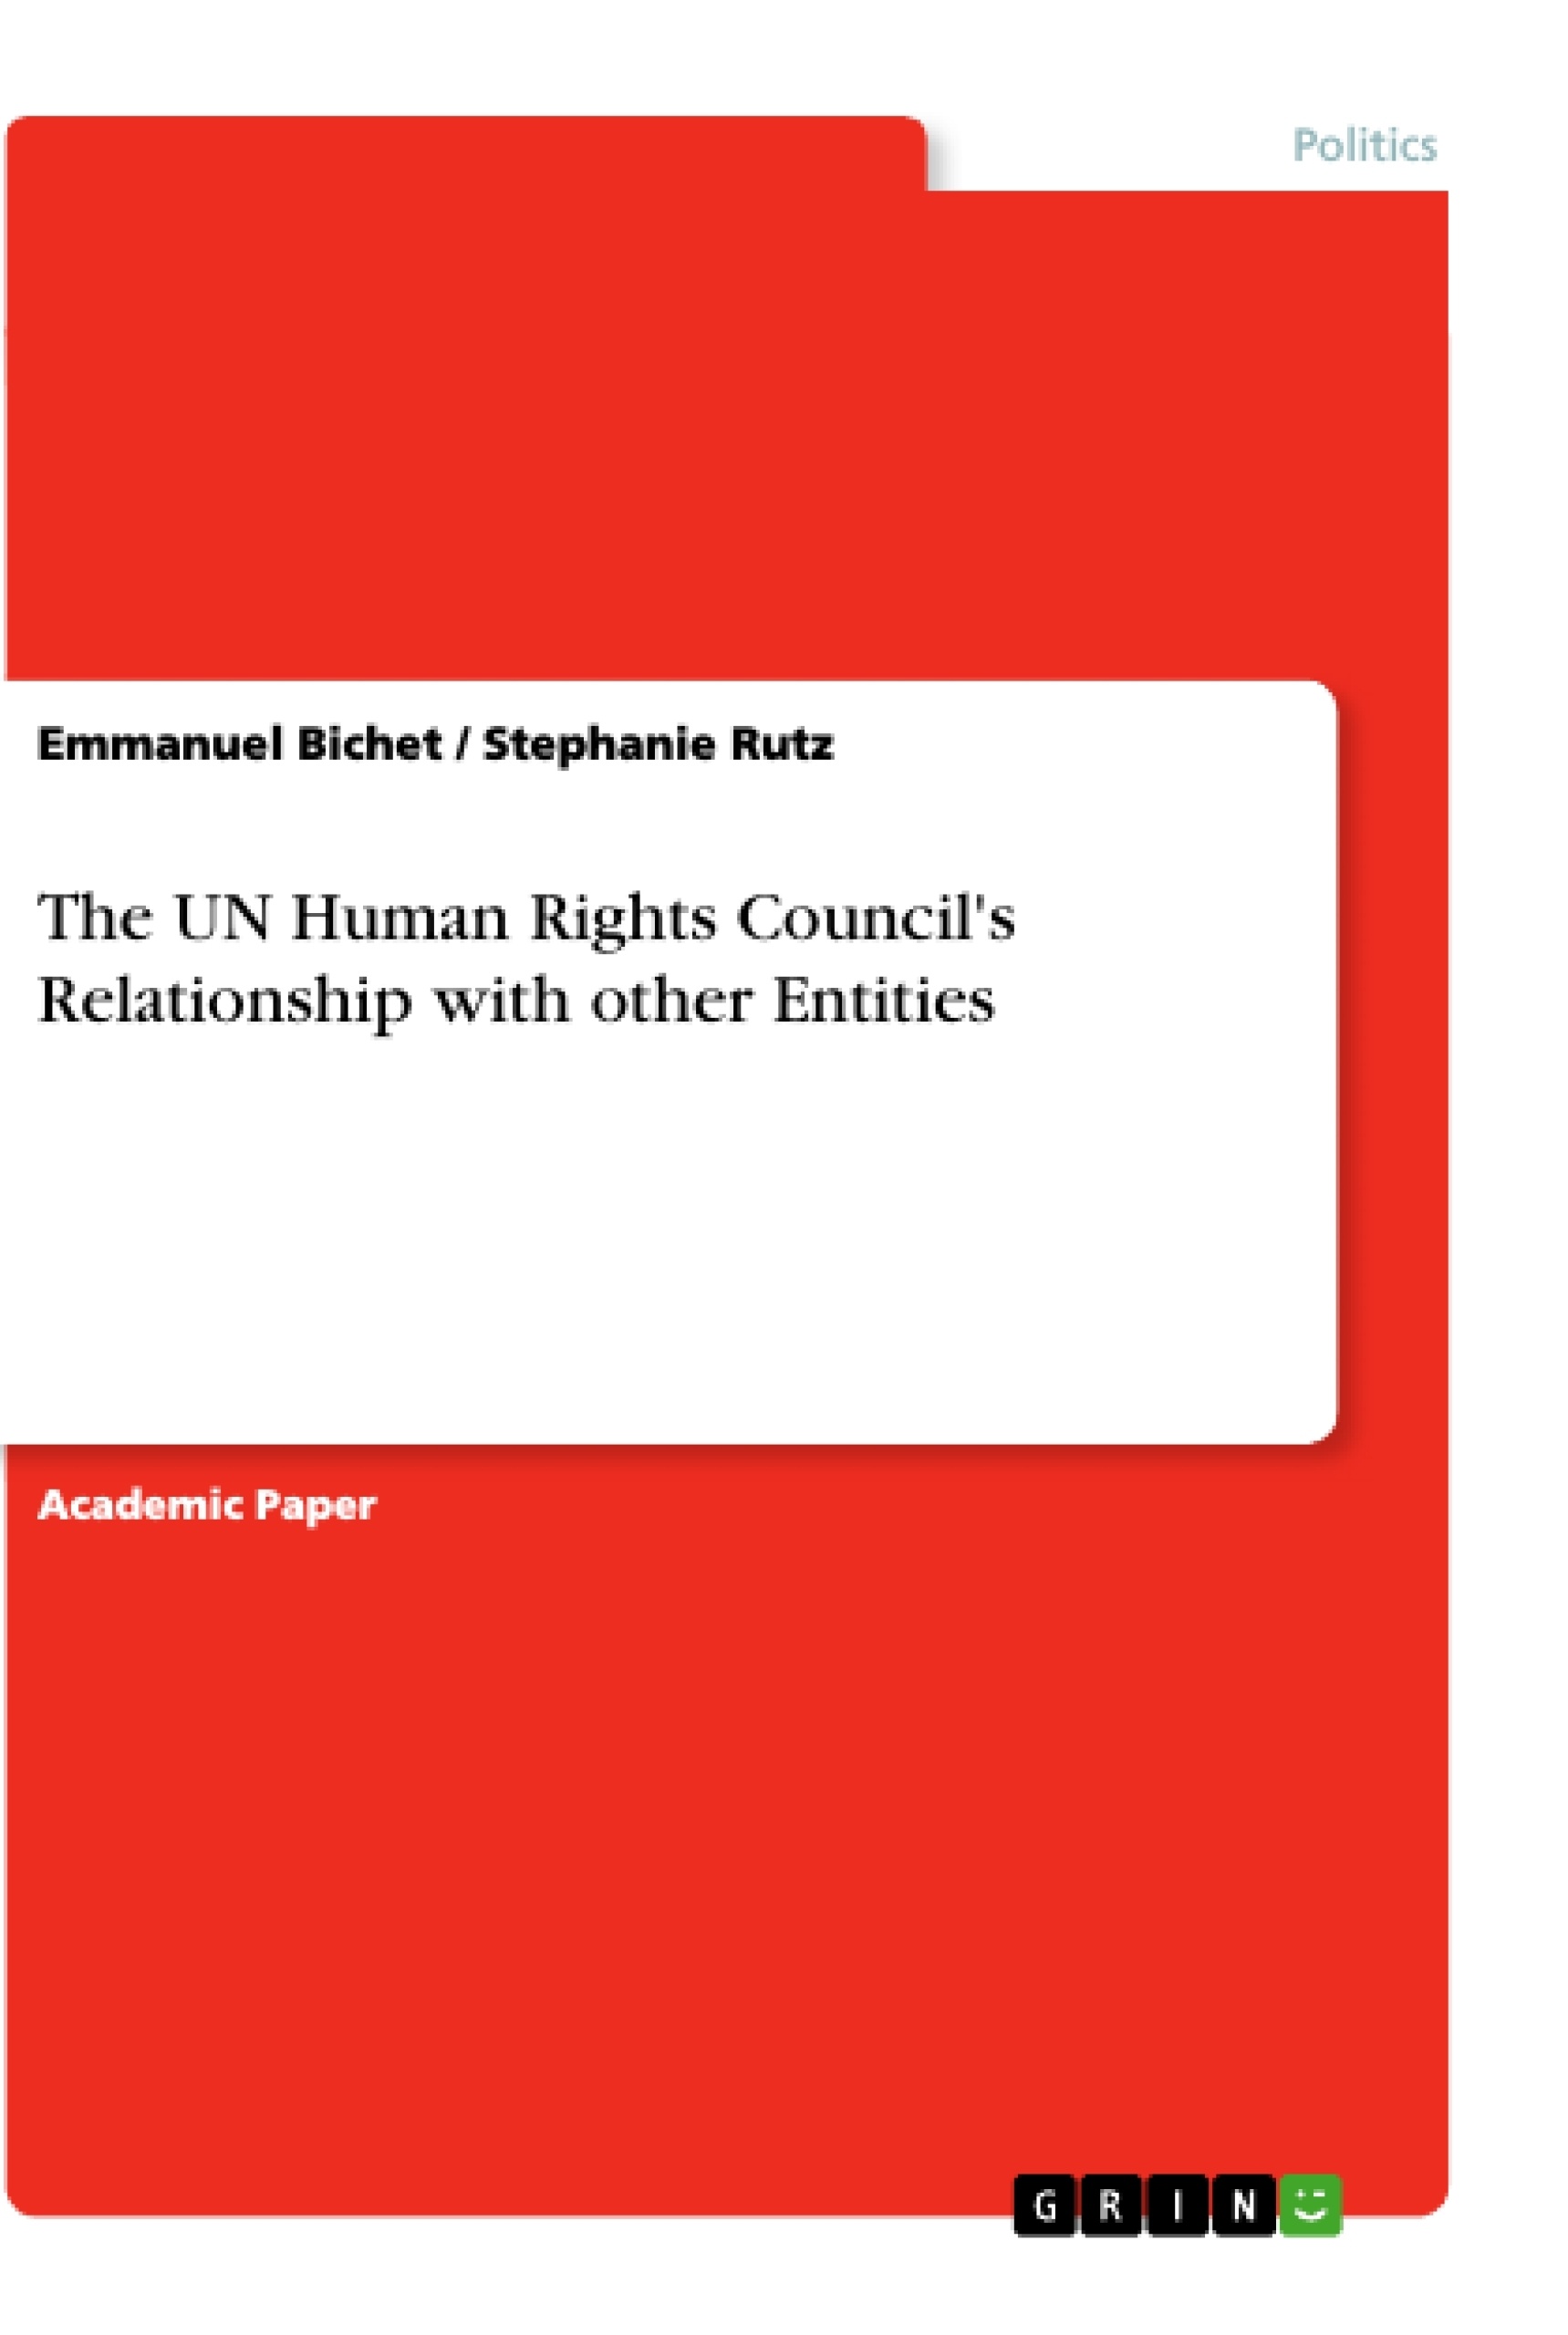 Título: The UN Human Rights Council's Relationship with other Entities